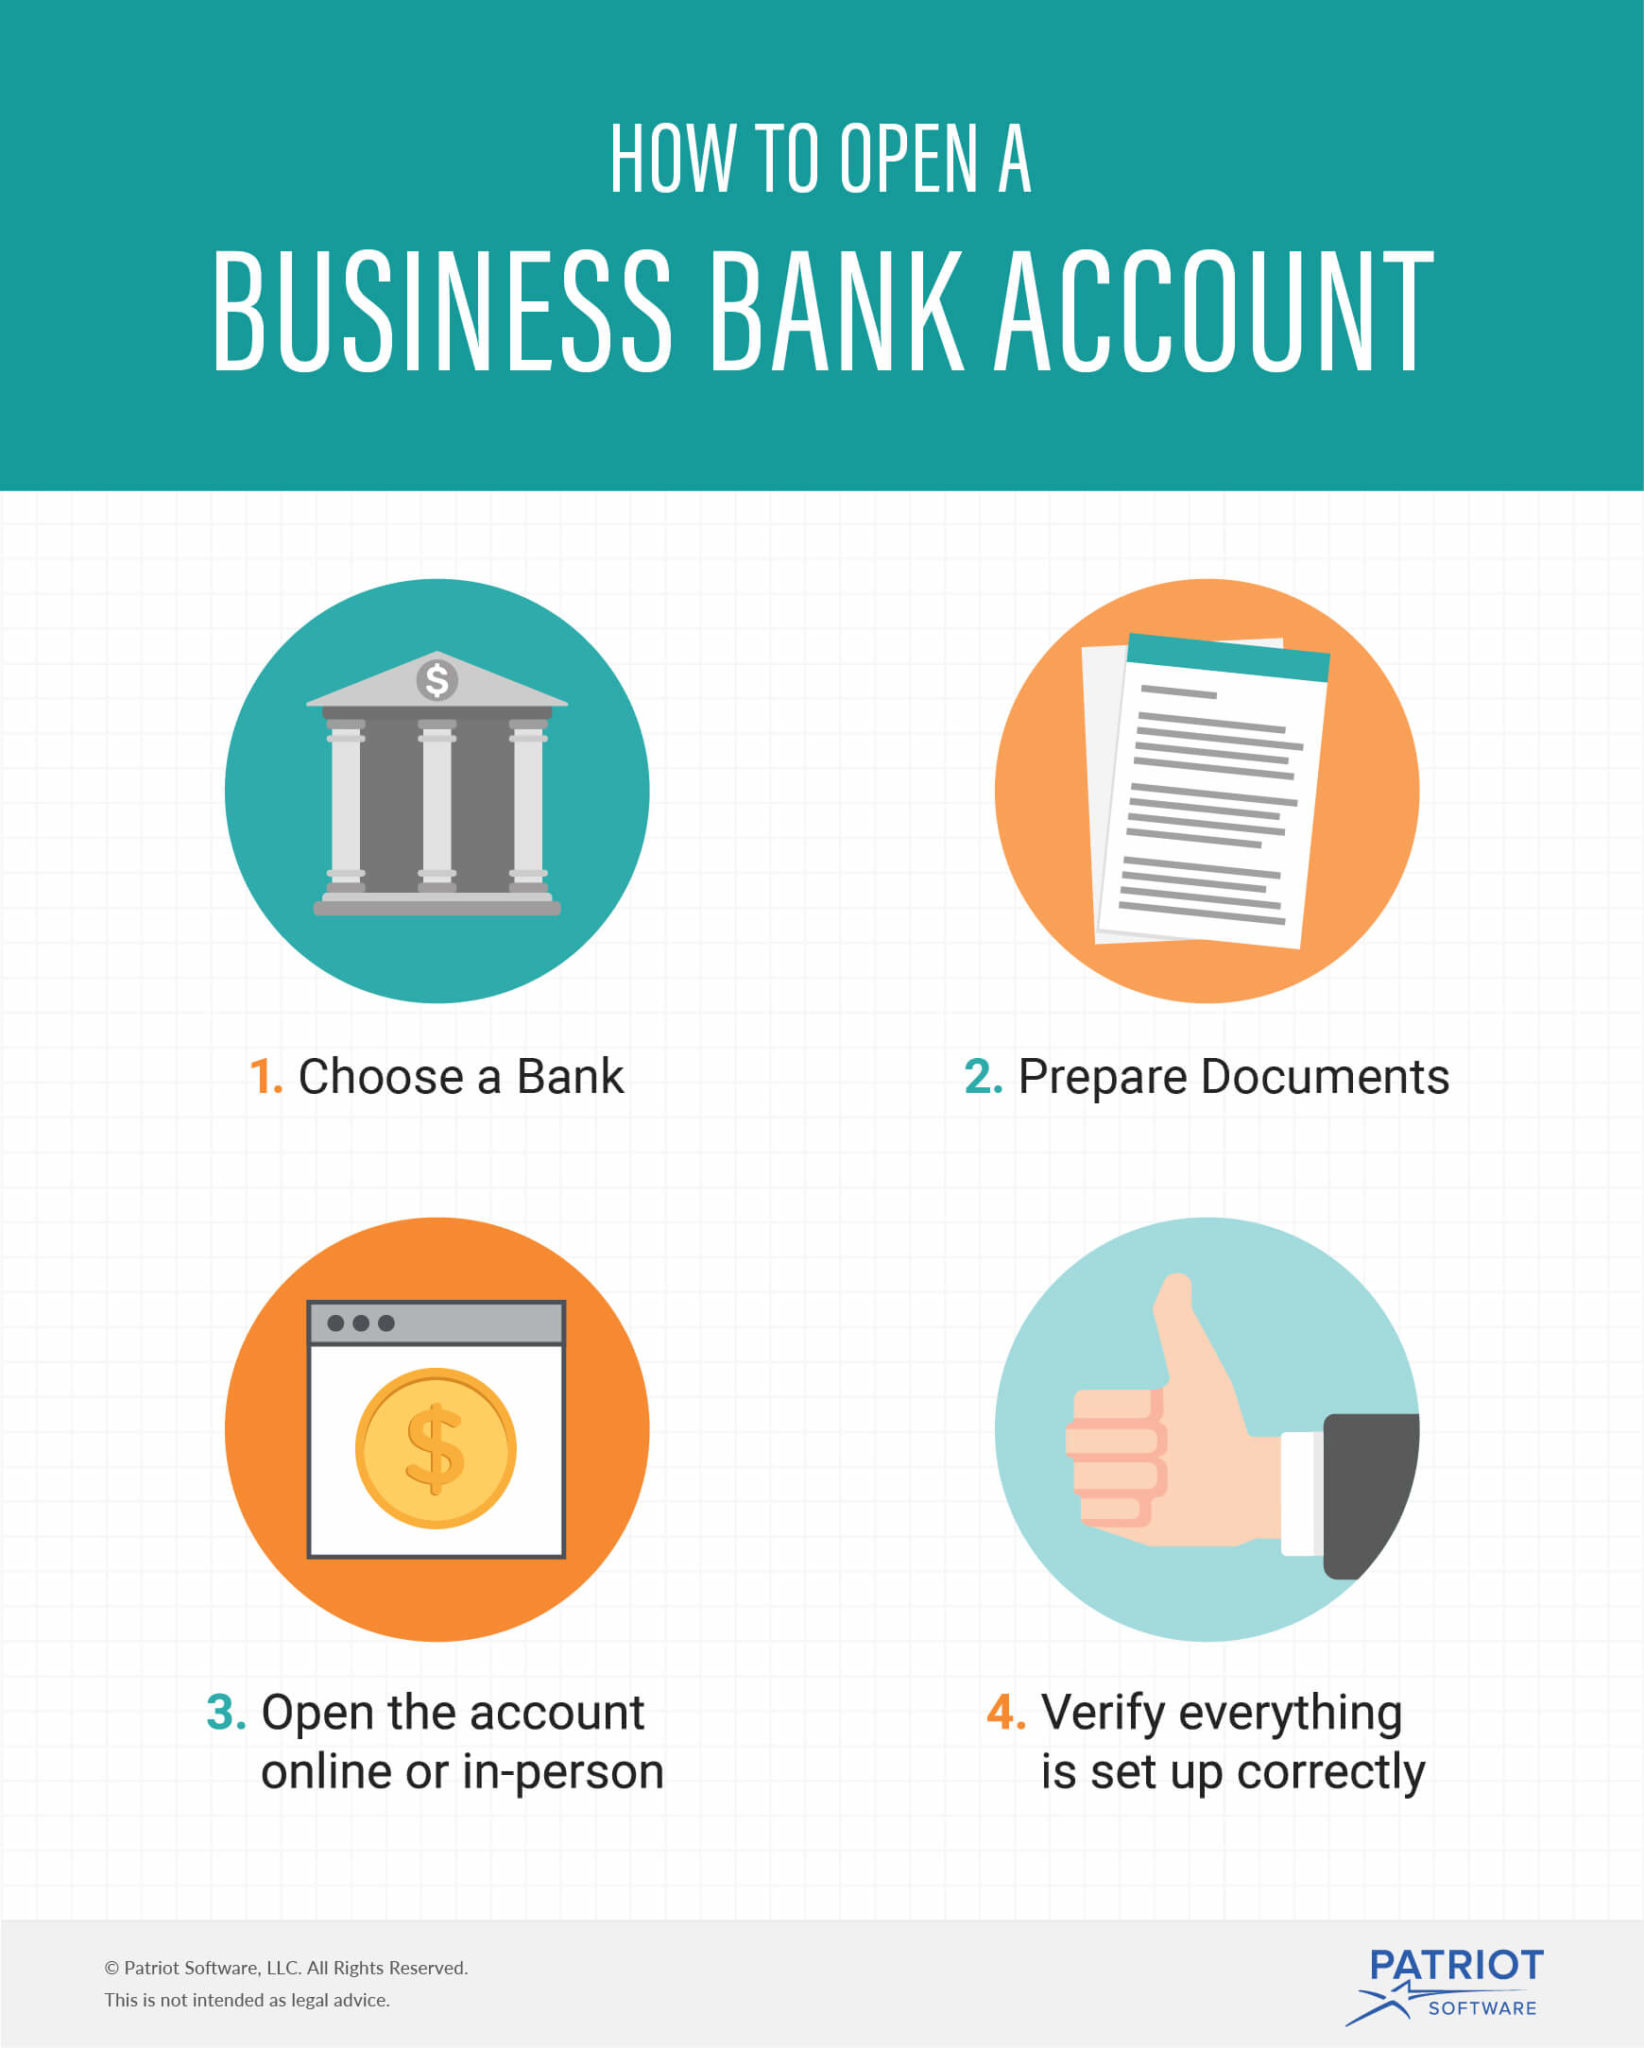 How to Open a Business Bank Account 4 Steps to Get Started